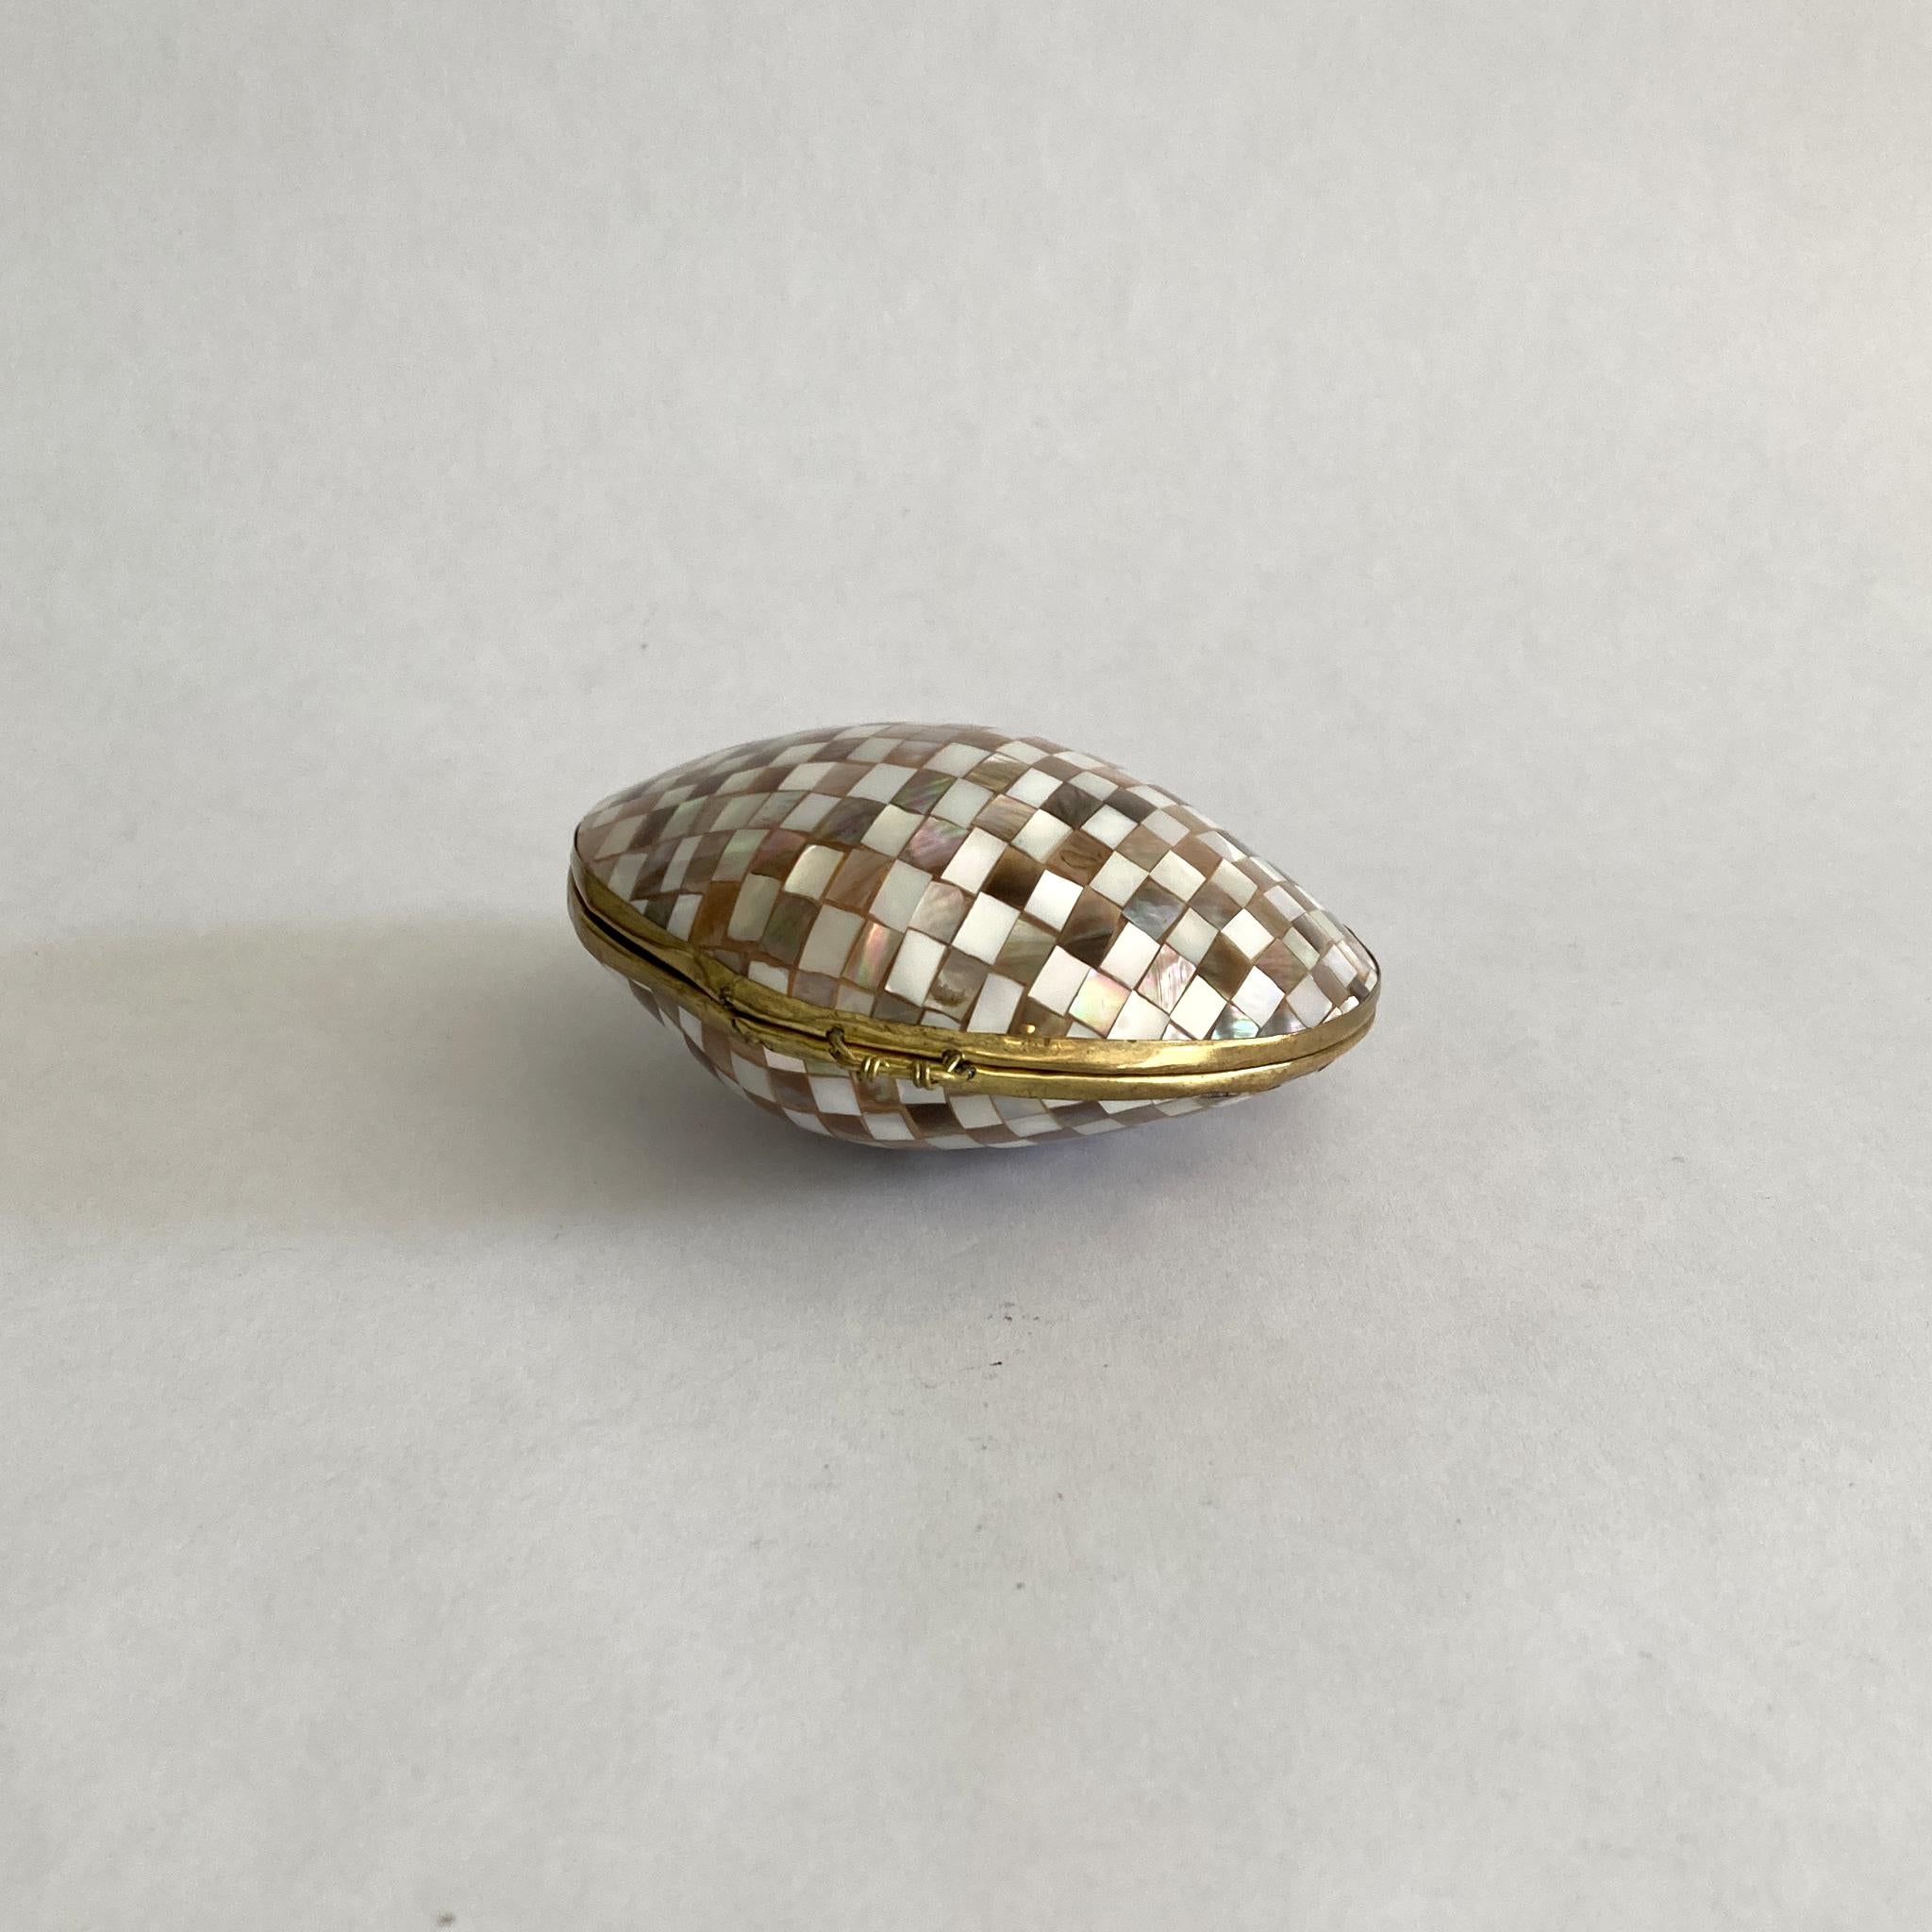 Hand-Crafted Vintage Hinged Seashell Box, in Checkerboard Mother of Pearl Mosaic, Brass Trim